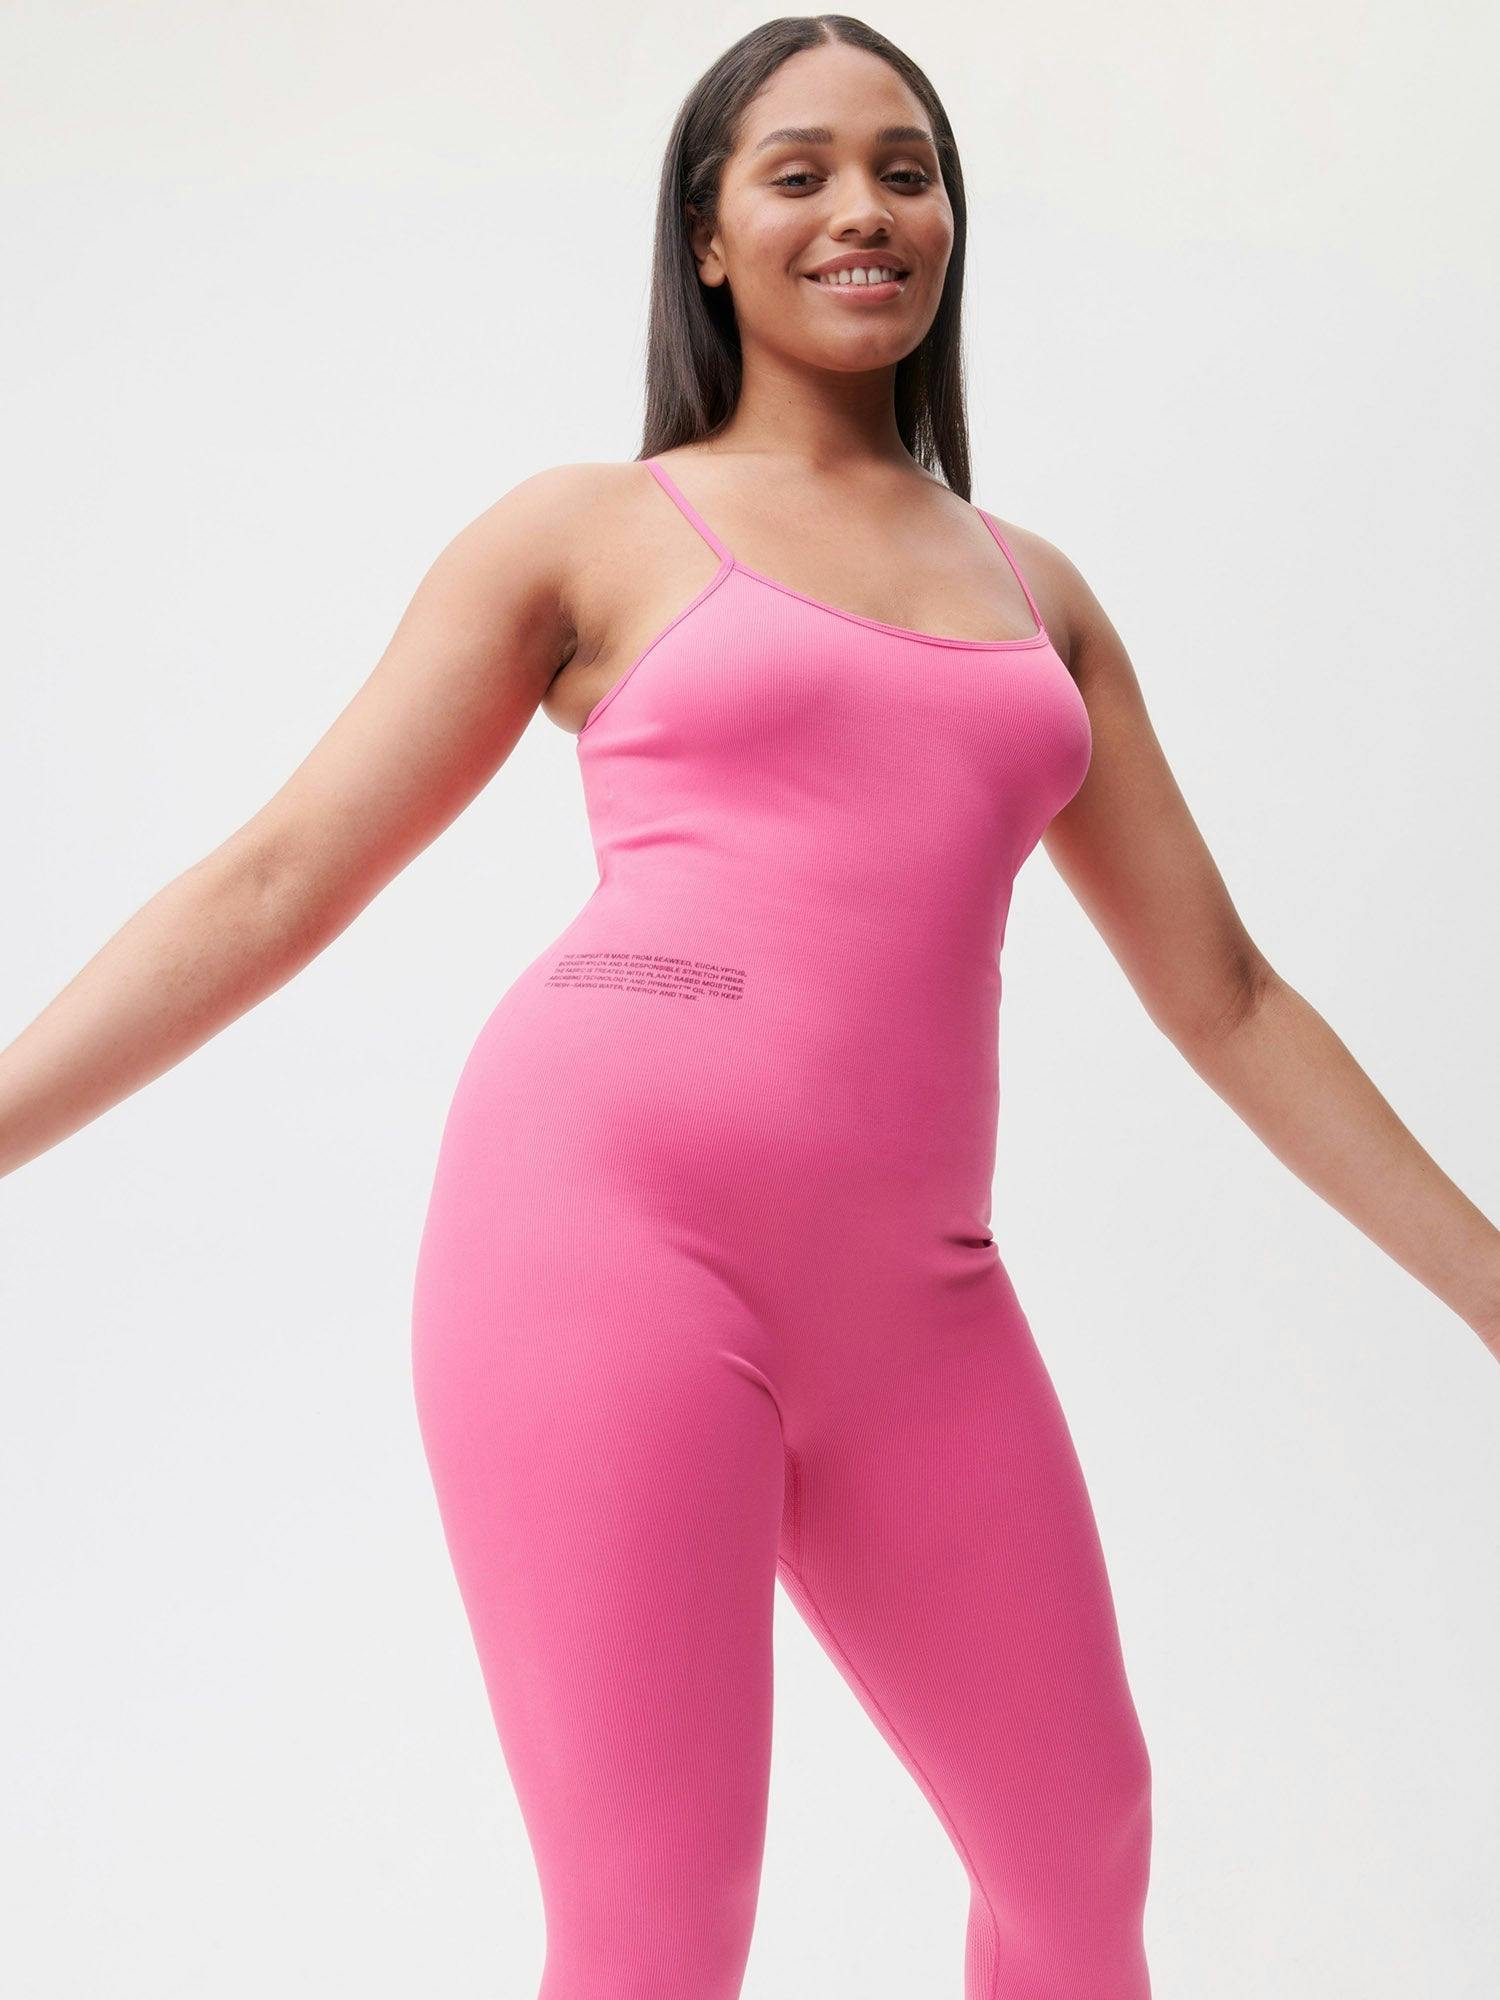 https://cdn.shopify.com/s/files/1/0035/1309/0115/products/Activewear-Womens-Jumpsuit-Flamingo-Pink-4bis.jpg?v=1662475874